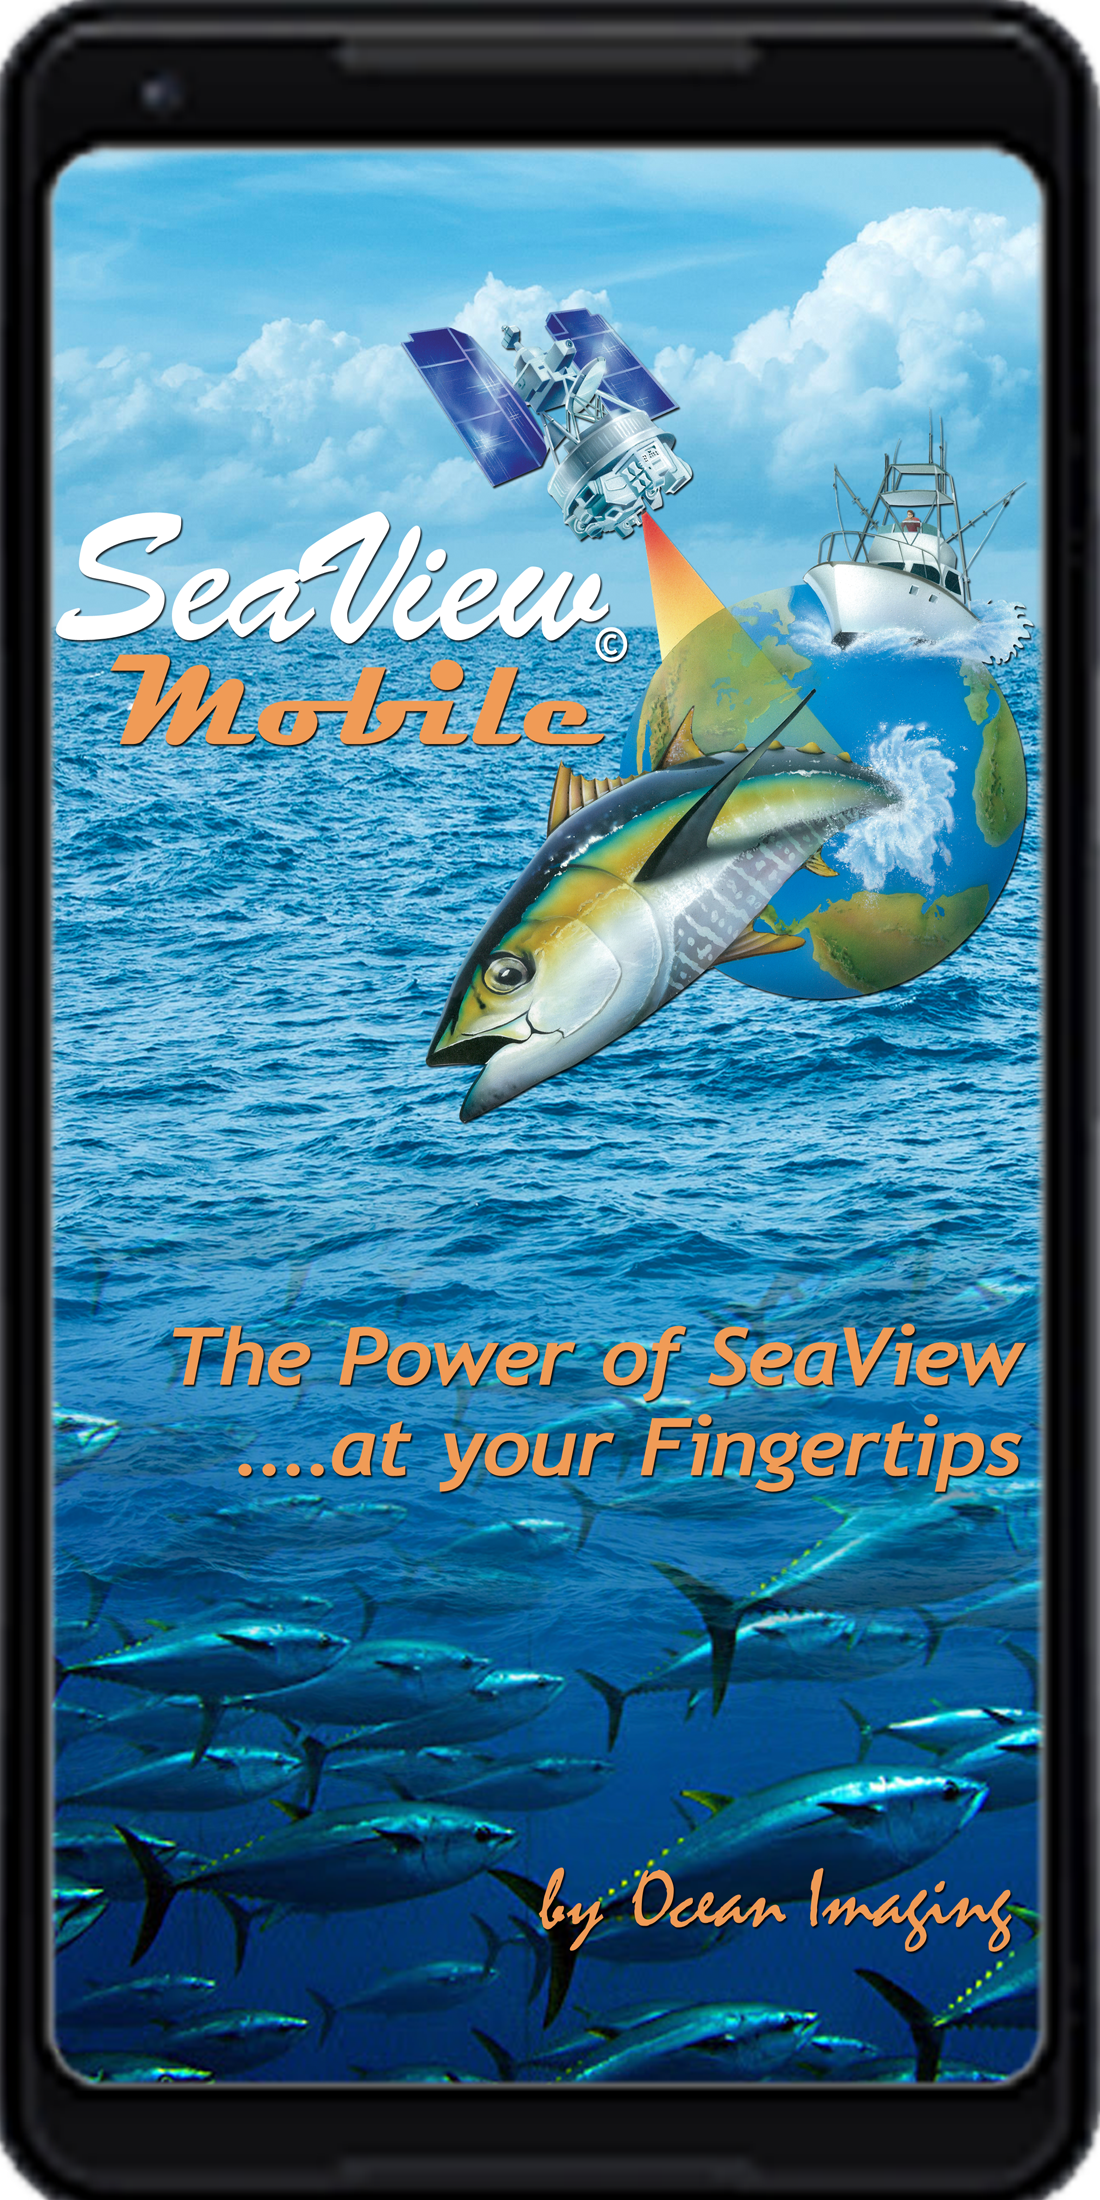 SeaView Mobile Image-The Power of SeaView at your Fingertips